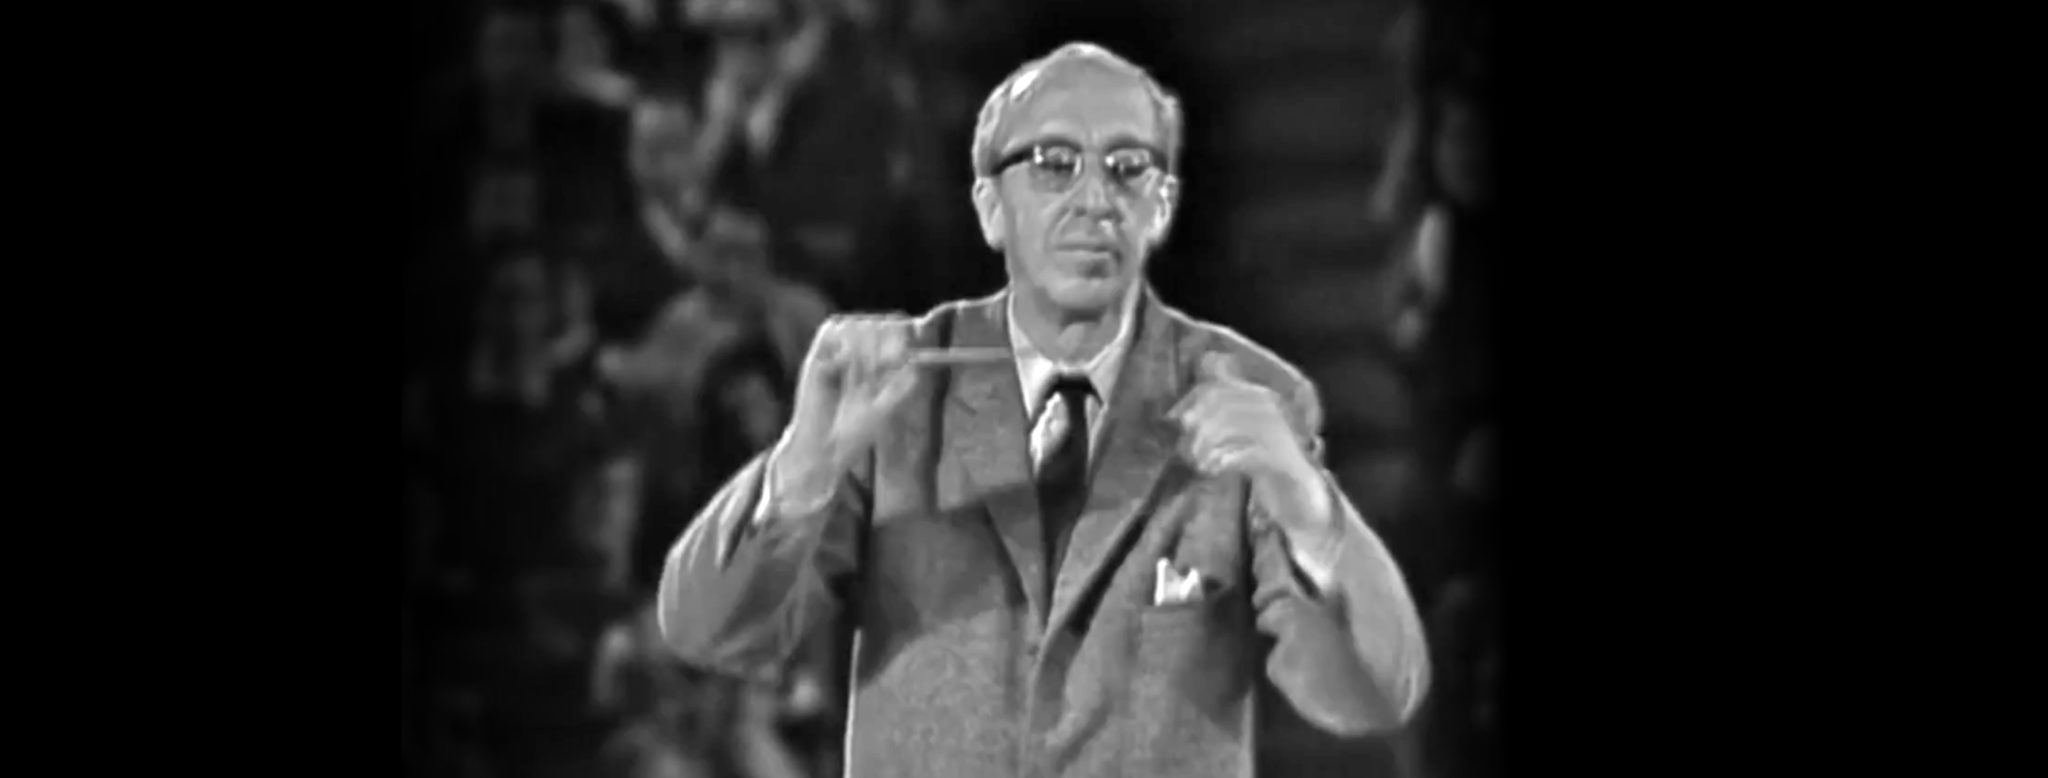 Aaron Copland conducts "El Salon Mexico" in a New York Philharmonic Young People's Concert, 1960. (Courtesy of the Leonard Bernstein Office, Inc.)